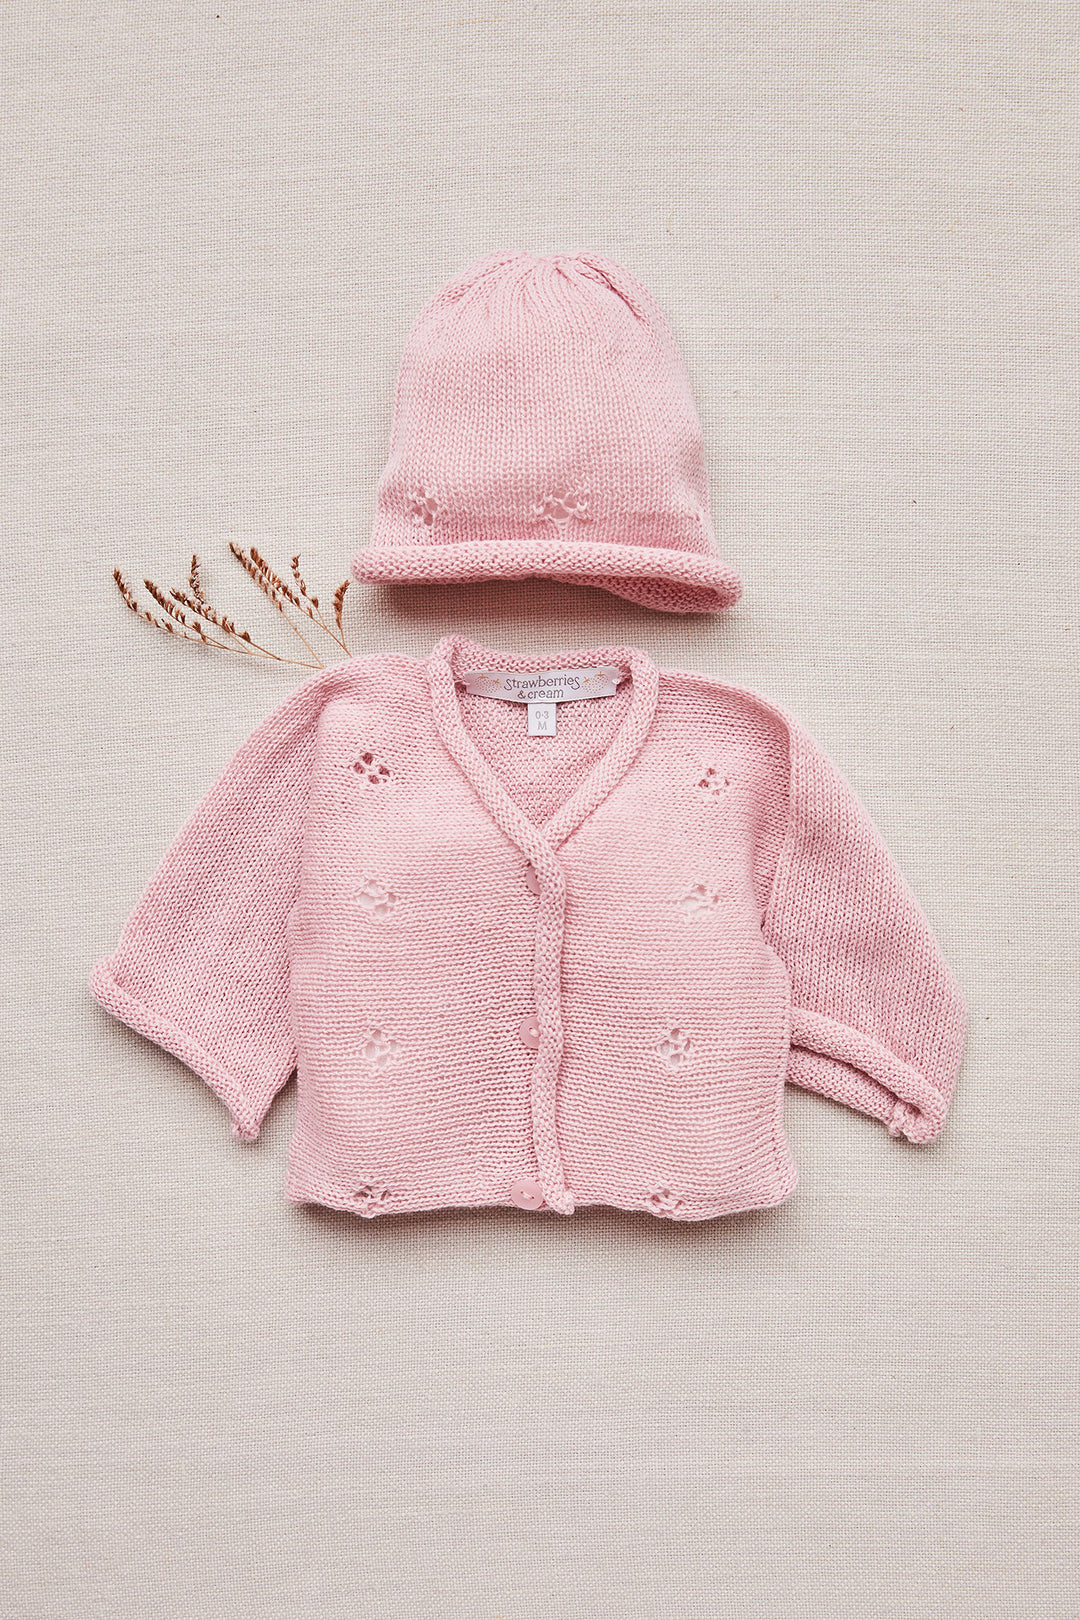 Merino Cardigan and Hat Set in Dusty Pink